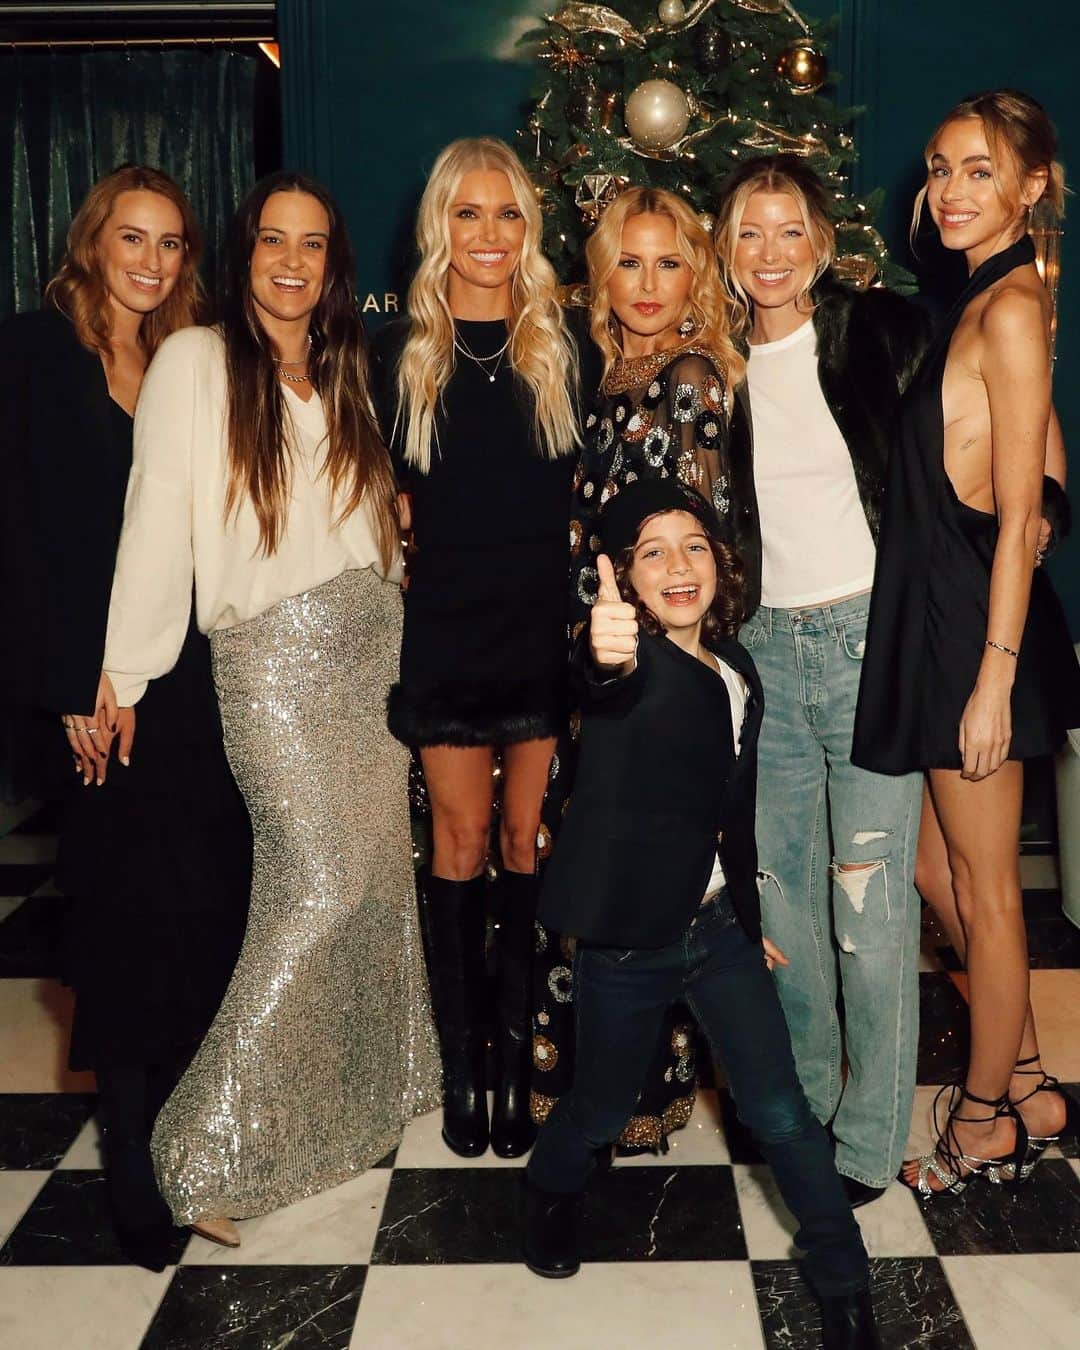 Elizabeth Turnerのインスタグラム：「best night with my Christmas angels 🤍🎄feeling extra grateful for @rachelzoe & the incredible women she brings together through @curateur + @kaseycrook 🤍 these ladies are not only absolute bosses but also kind, welcoming, and always willing to impart their wisdom! Love y'all 🥰🤍✨」